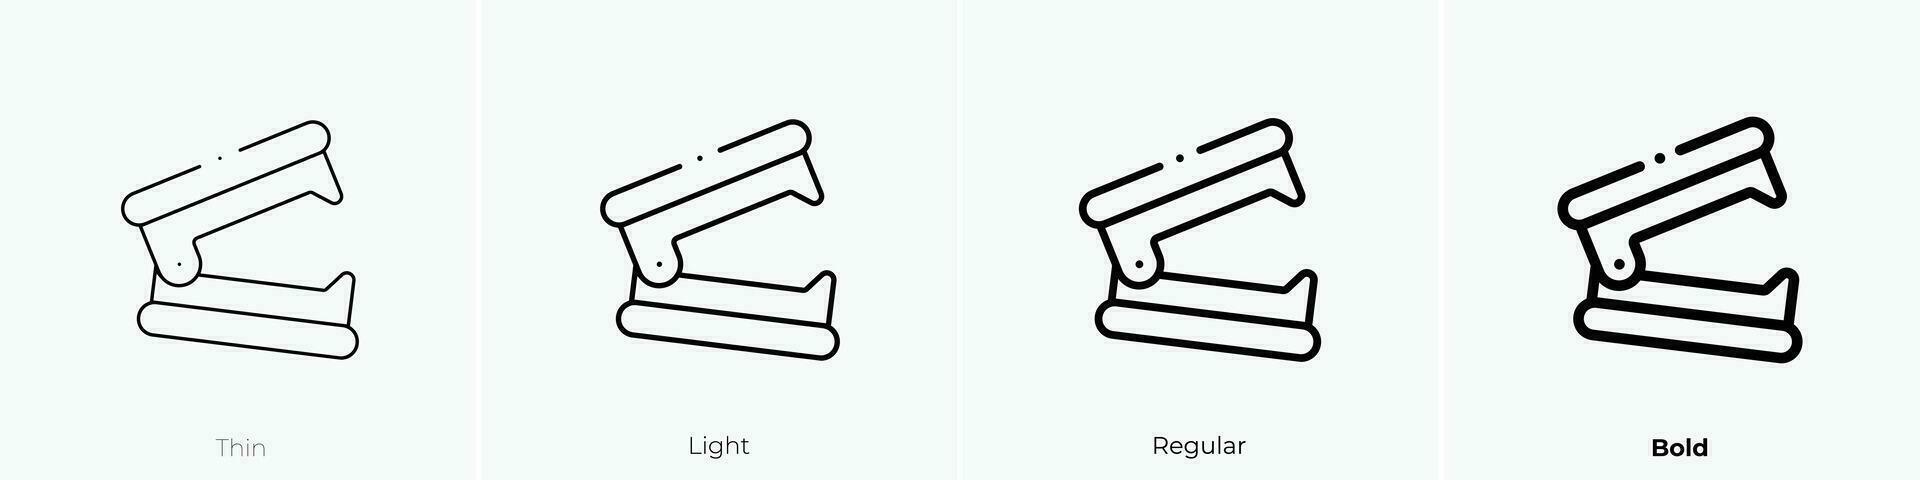 stapler remover icon. Thin, Light, Regular And Bold style design isolated on white background vector